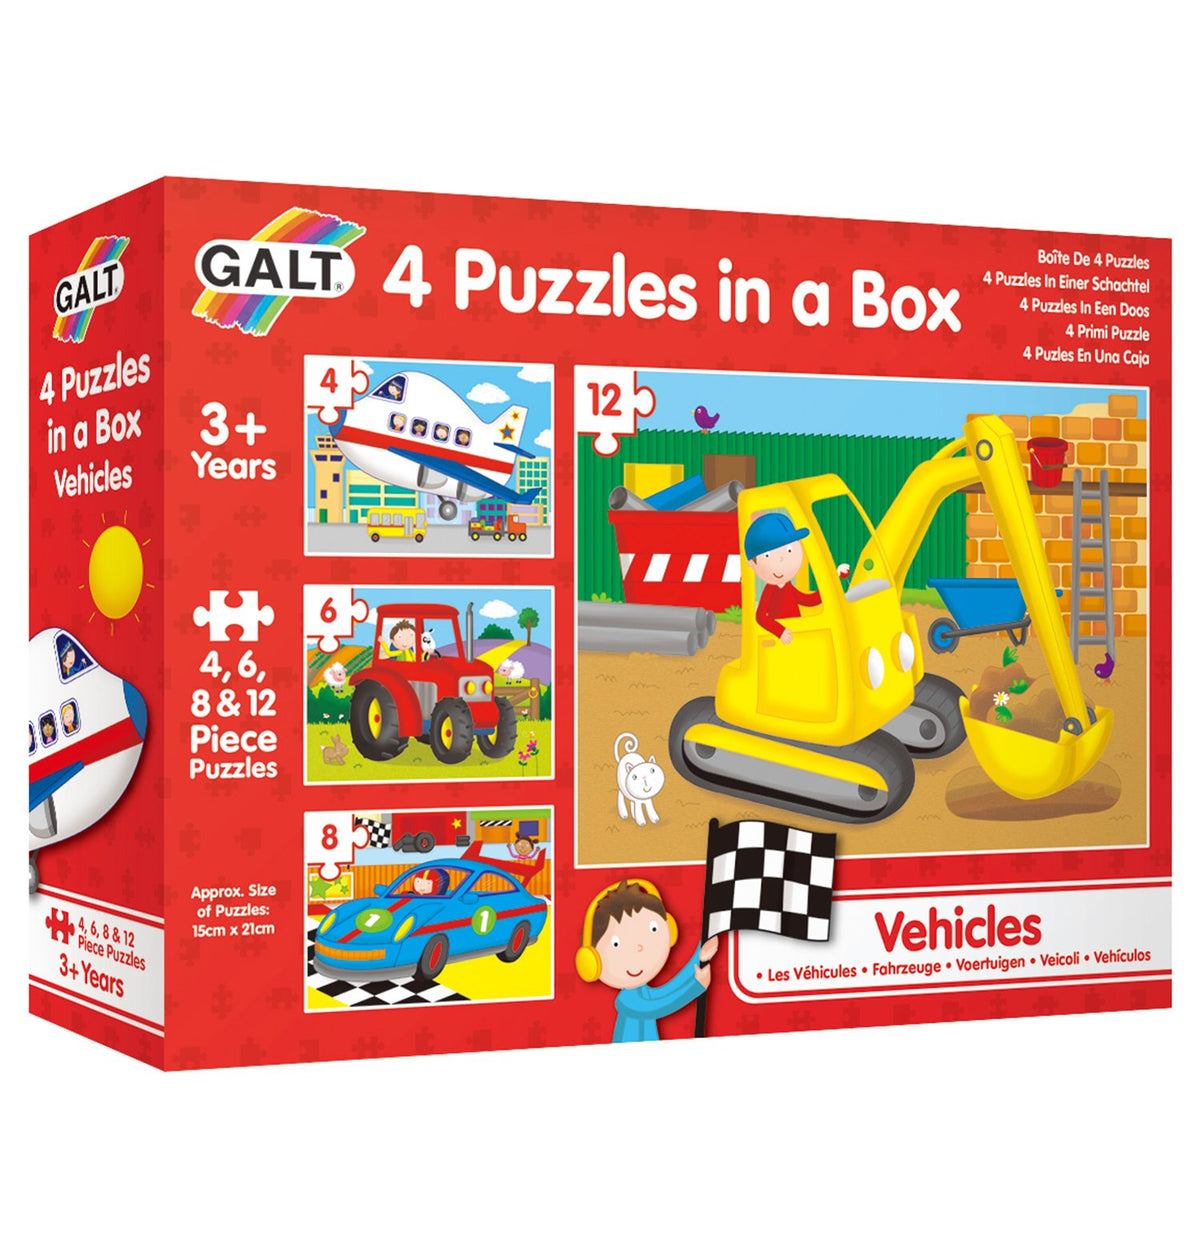 Galt 4 Puzzles In A Box